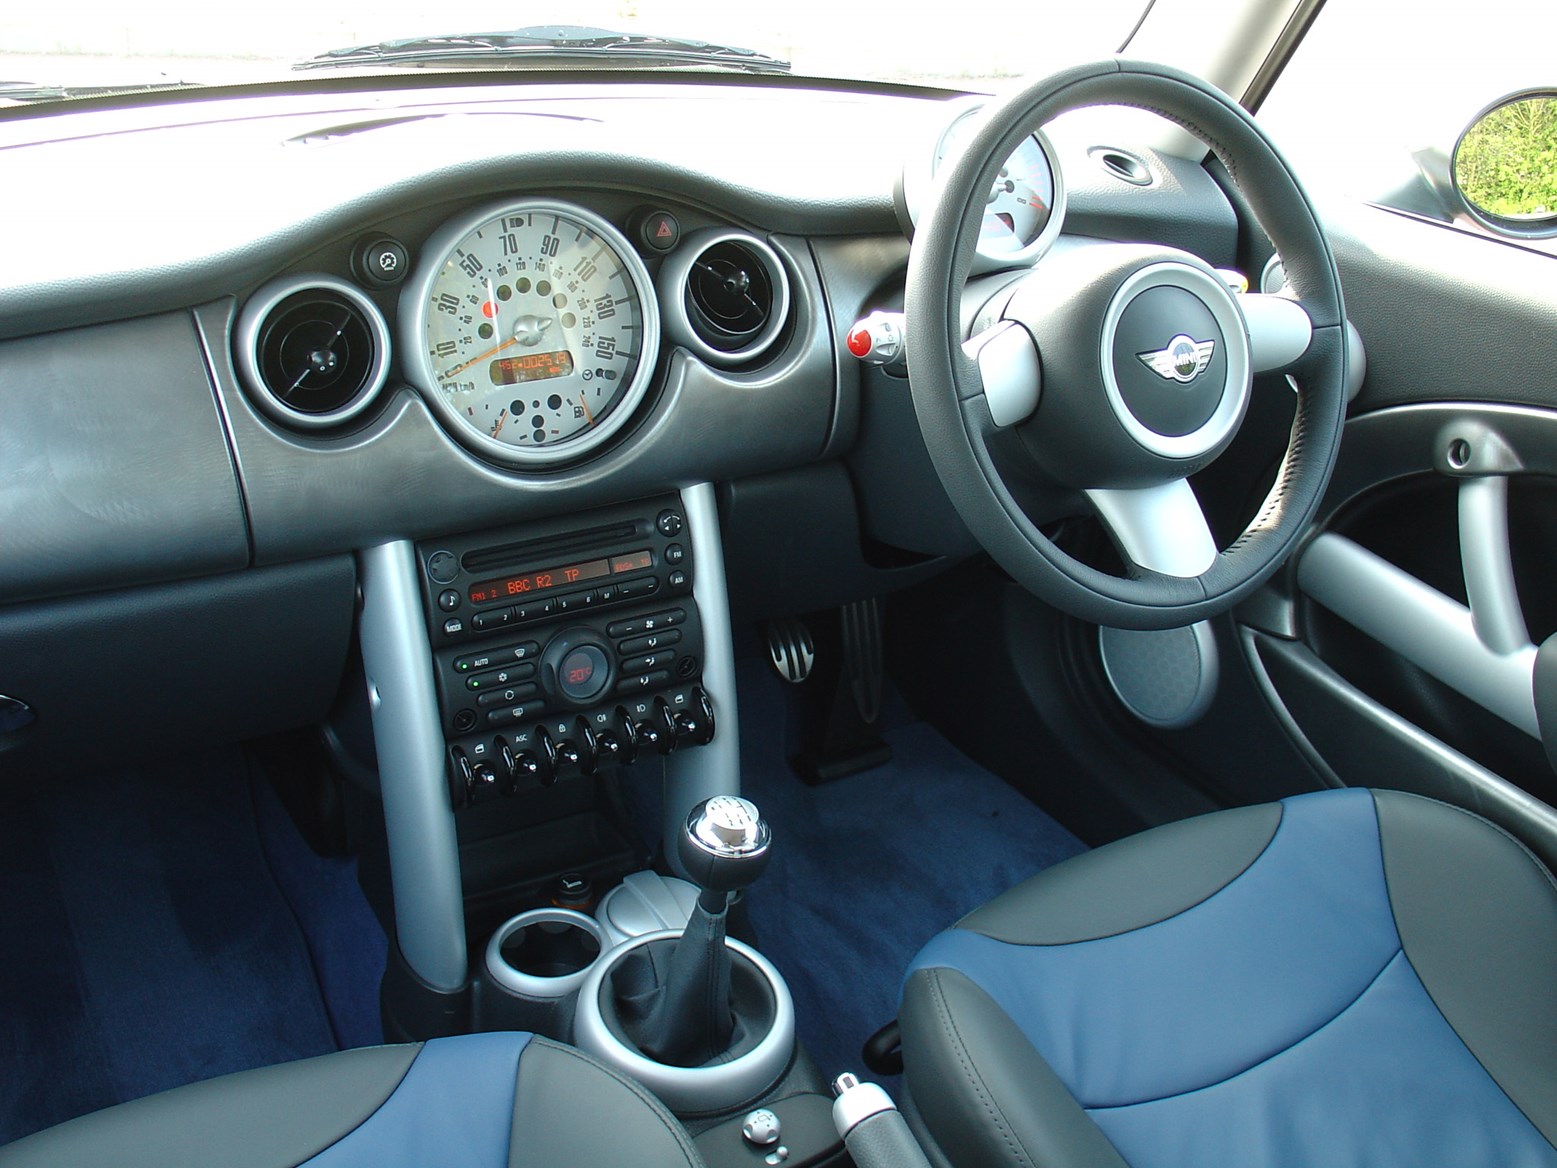 MINI Cooper S Hatchback Review (2002 - 2006) | Parkers